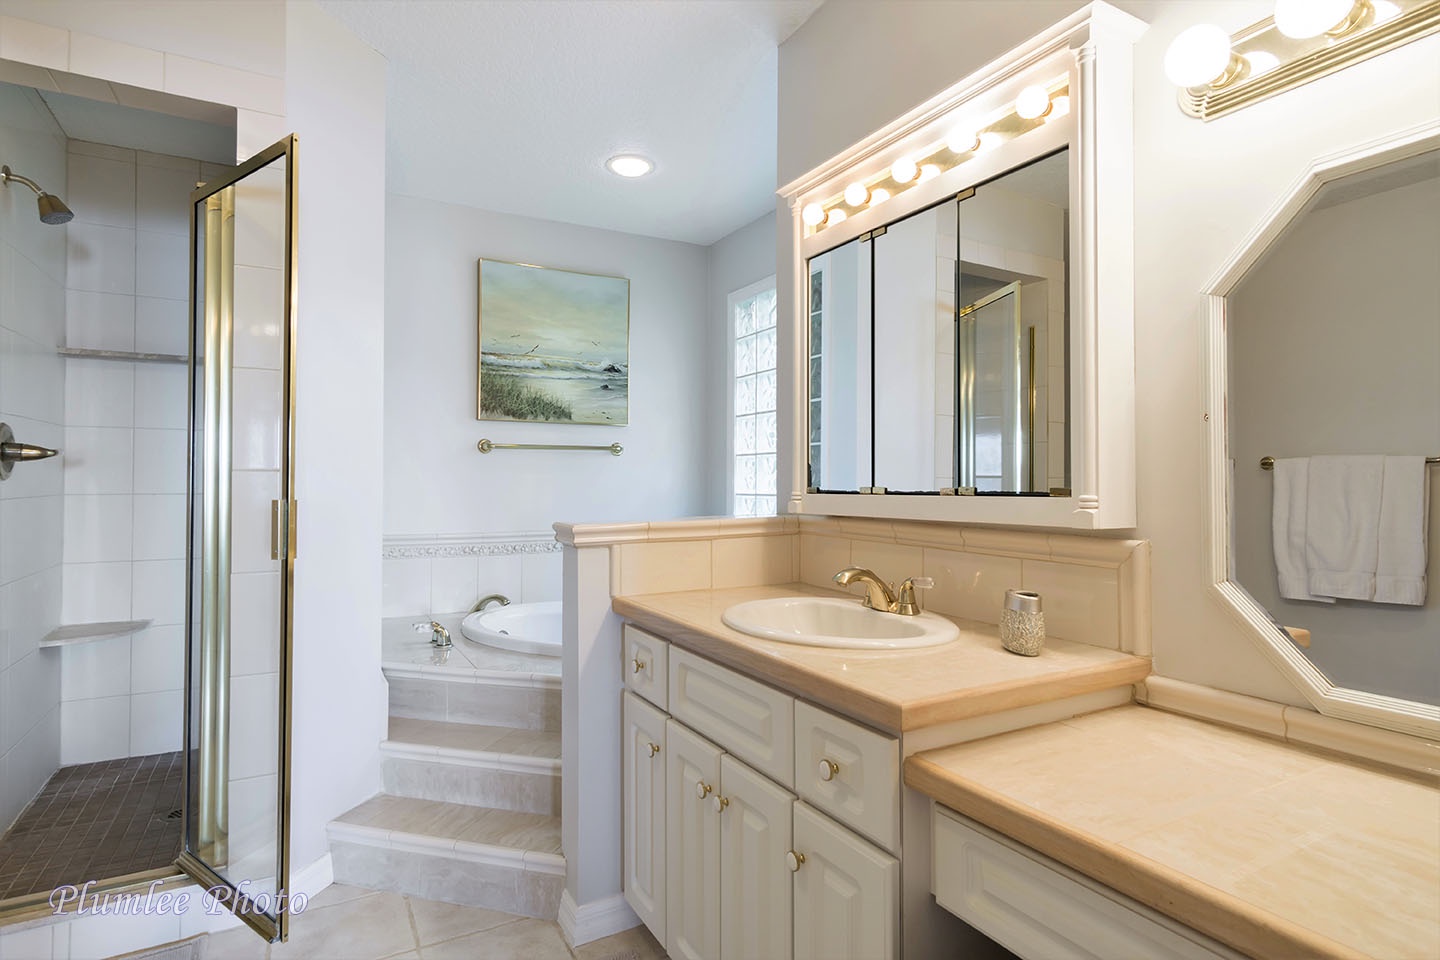 The huge master bathroom is a great place to relax.